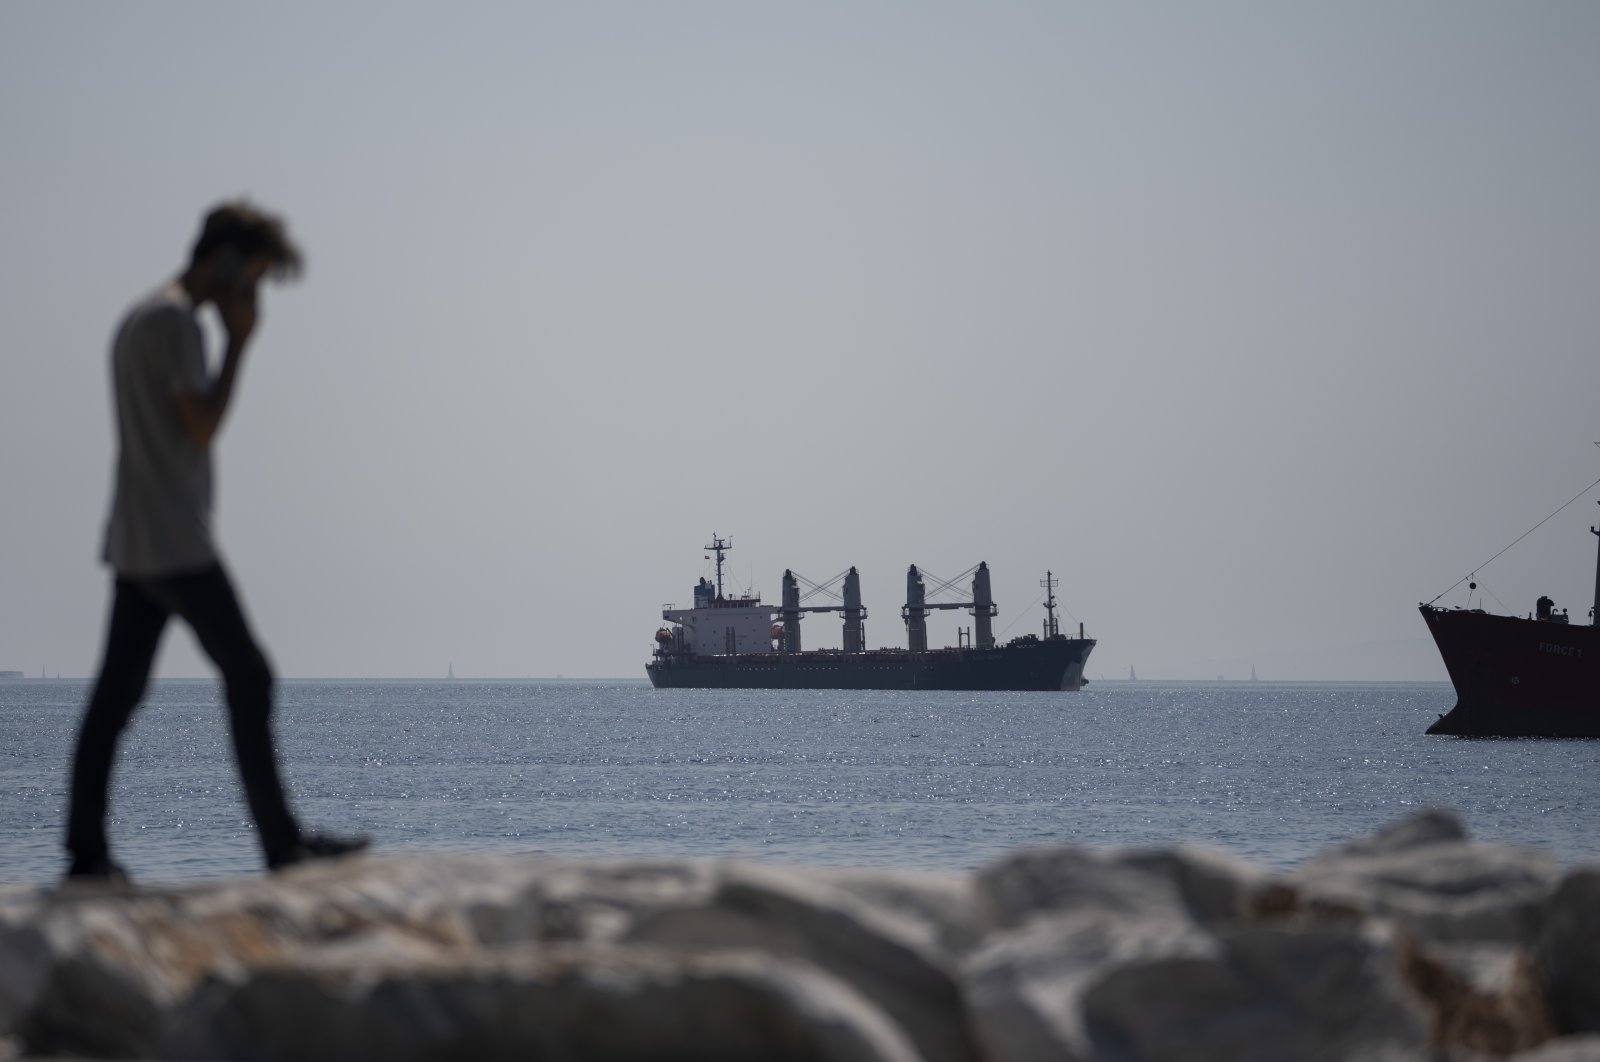 The Panama-flagged cargo ship Lady Zehma, carrying tons of grain from Ukraine, anchors in the Marmara Sea in Istanbul, Türkiye, Sept. 2, 2022. (AP Photo)